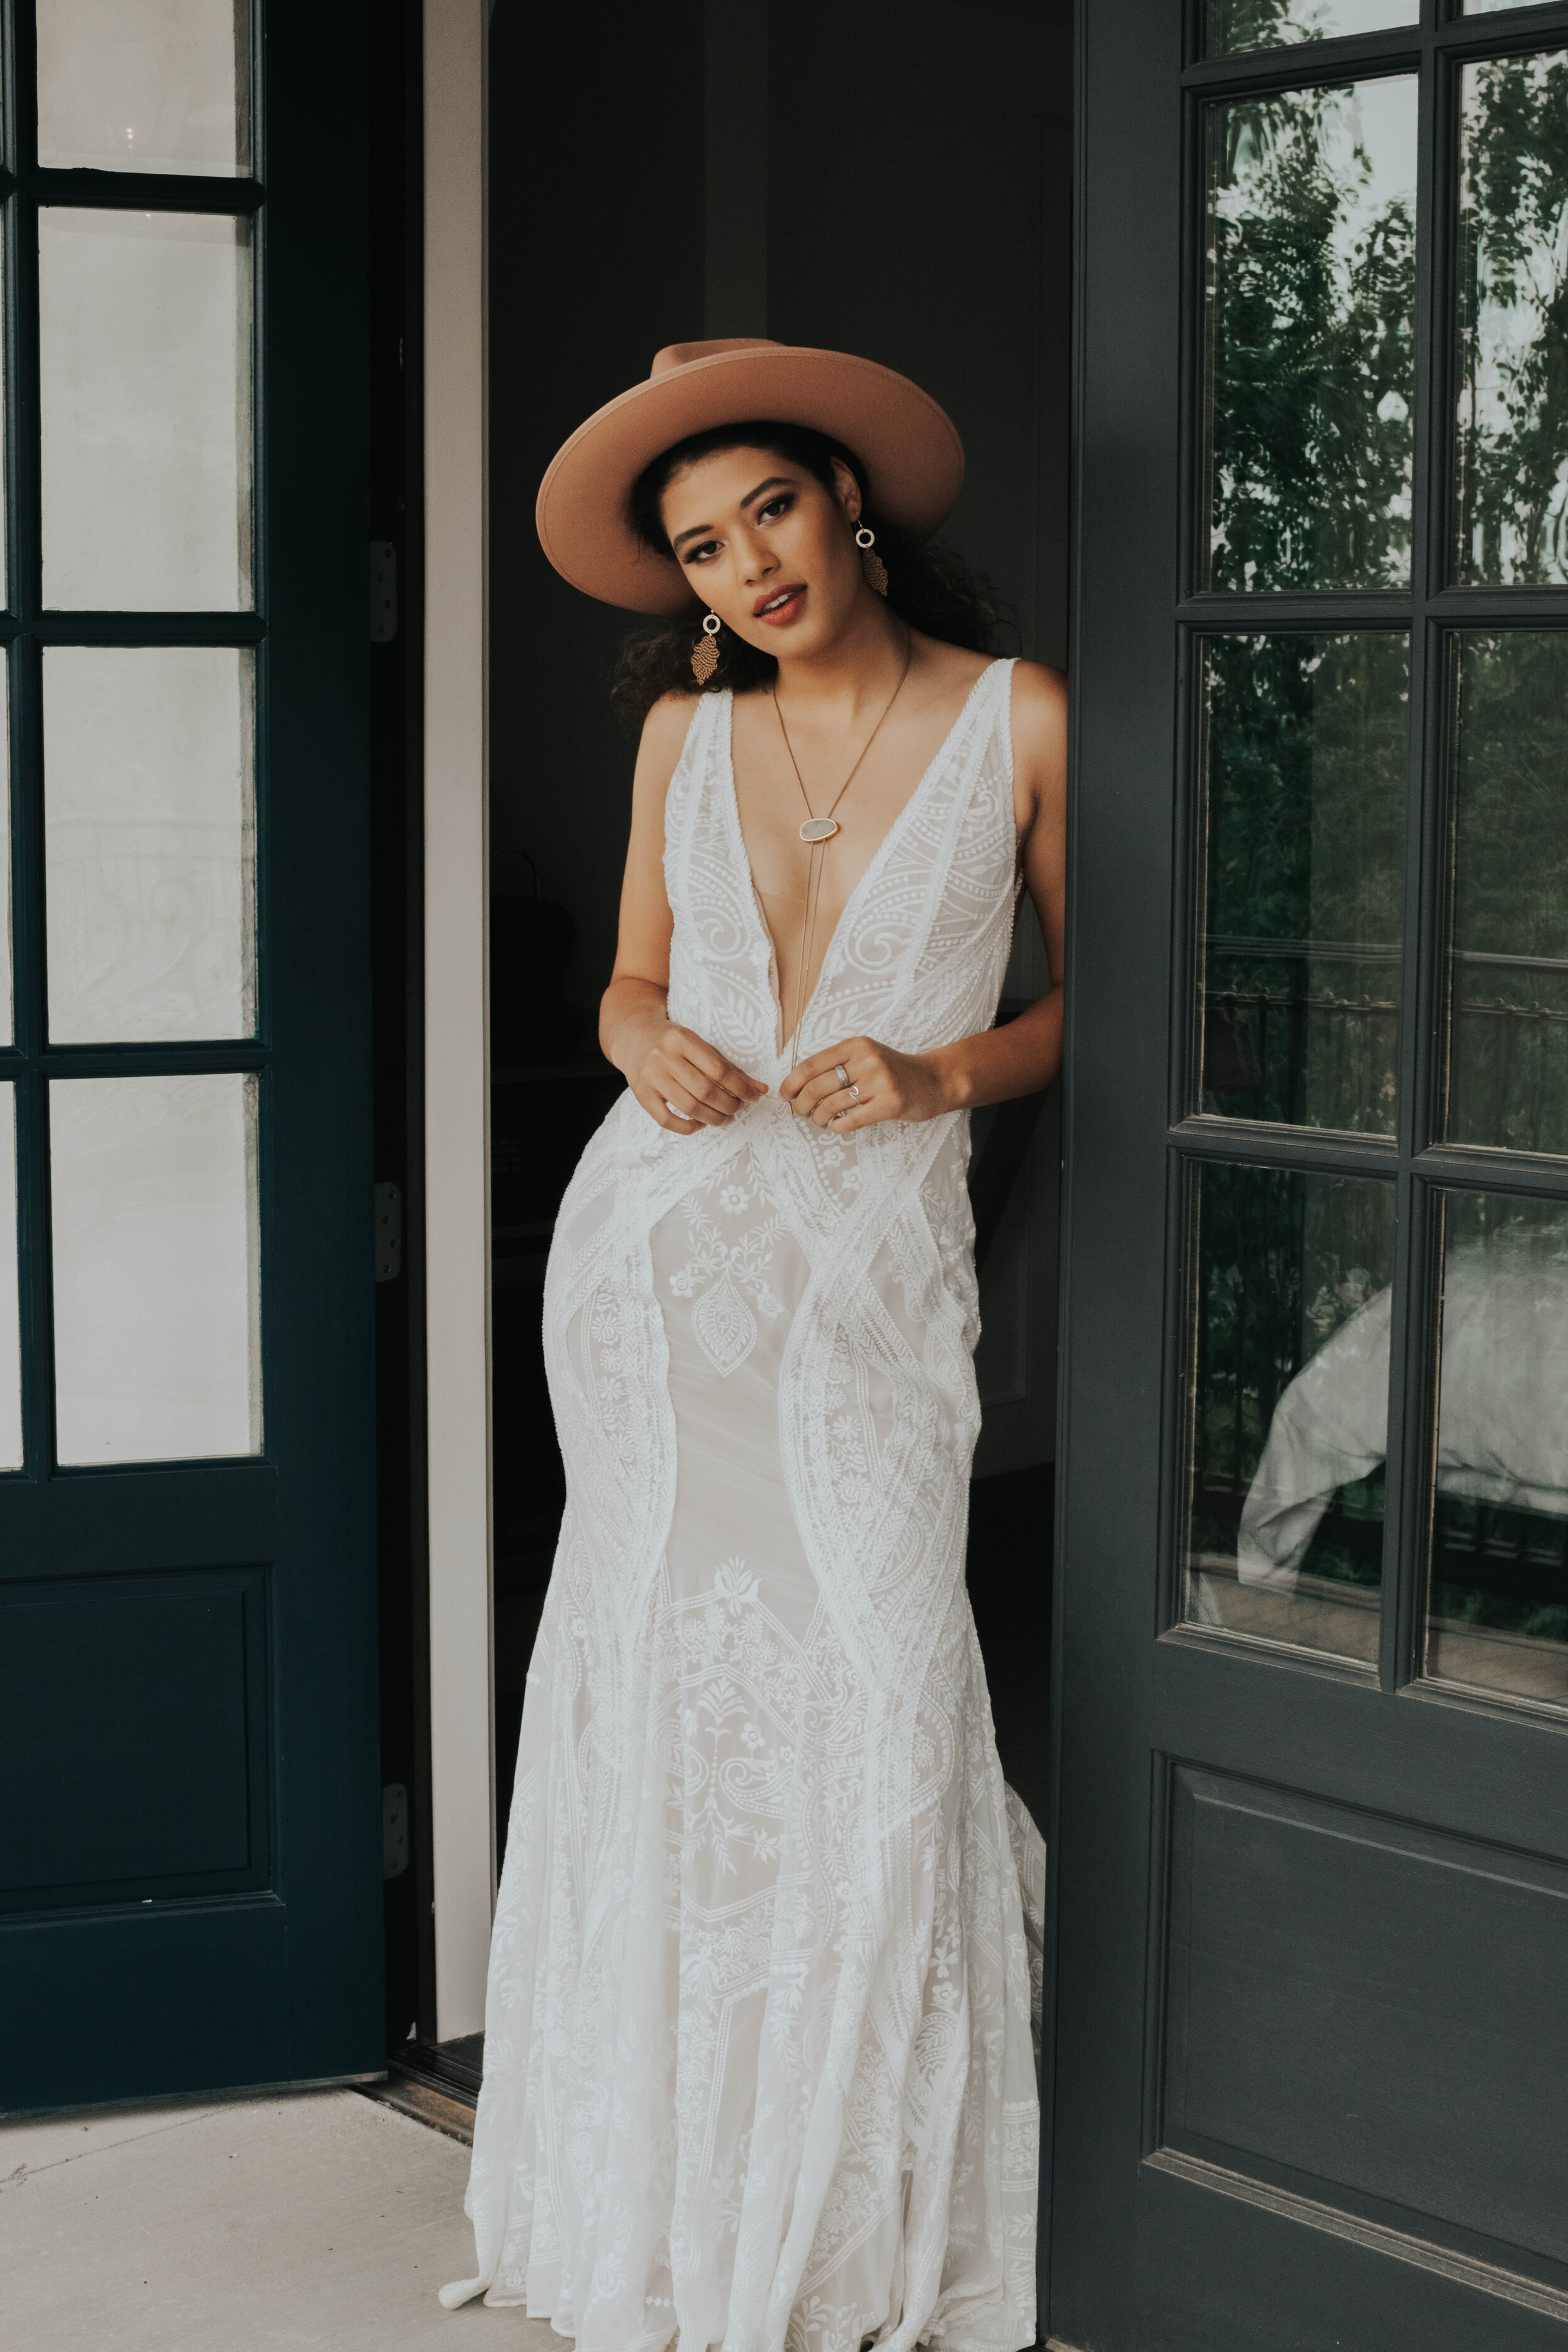  Bridal Rebel styled shoot at the Surf Hotel in Buena Vista, Colorado in Rue de Seine wedding dresses from a&amp;be denver bridal shop 